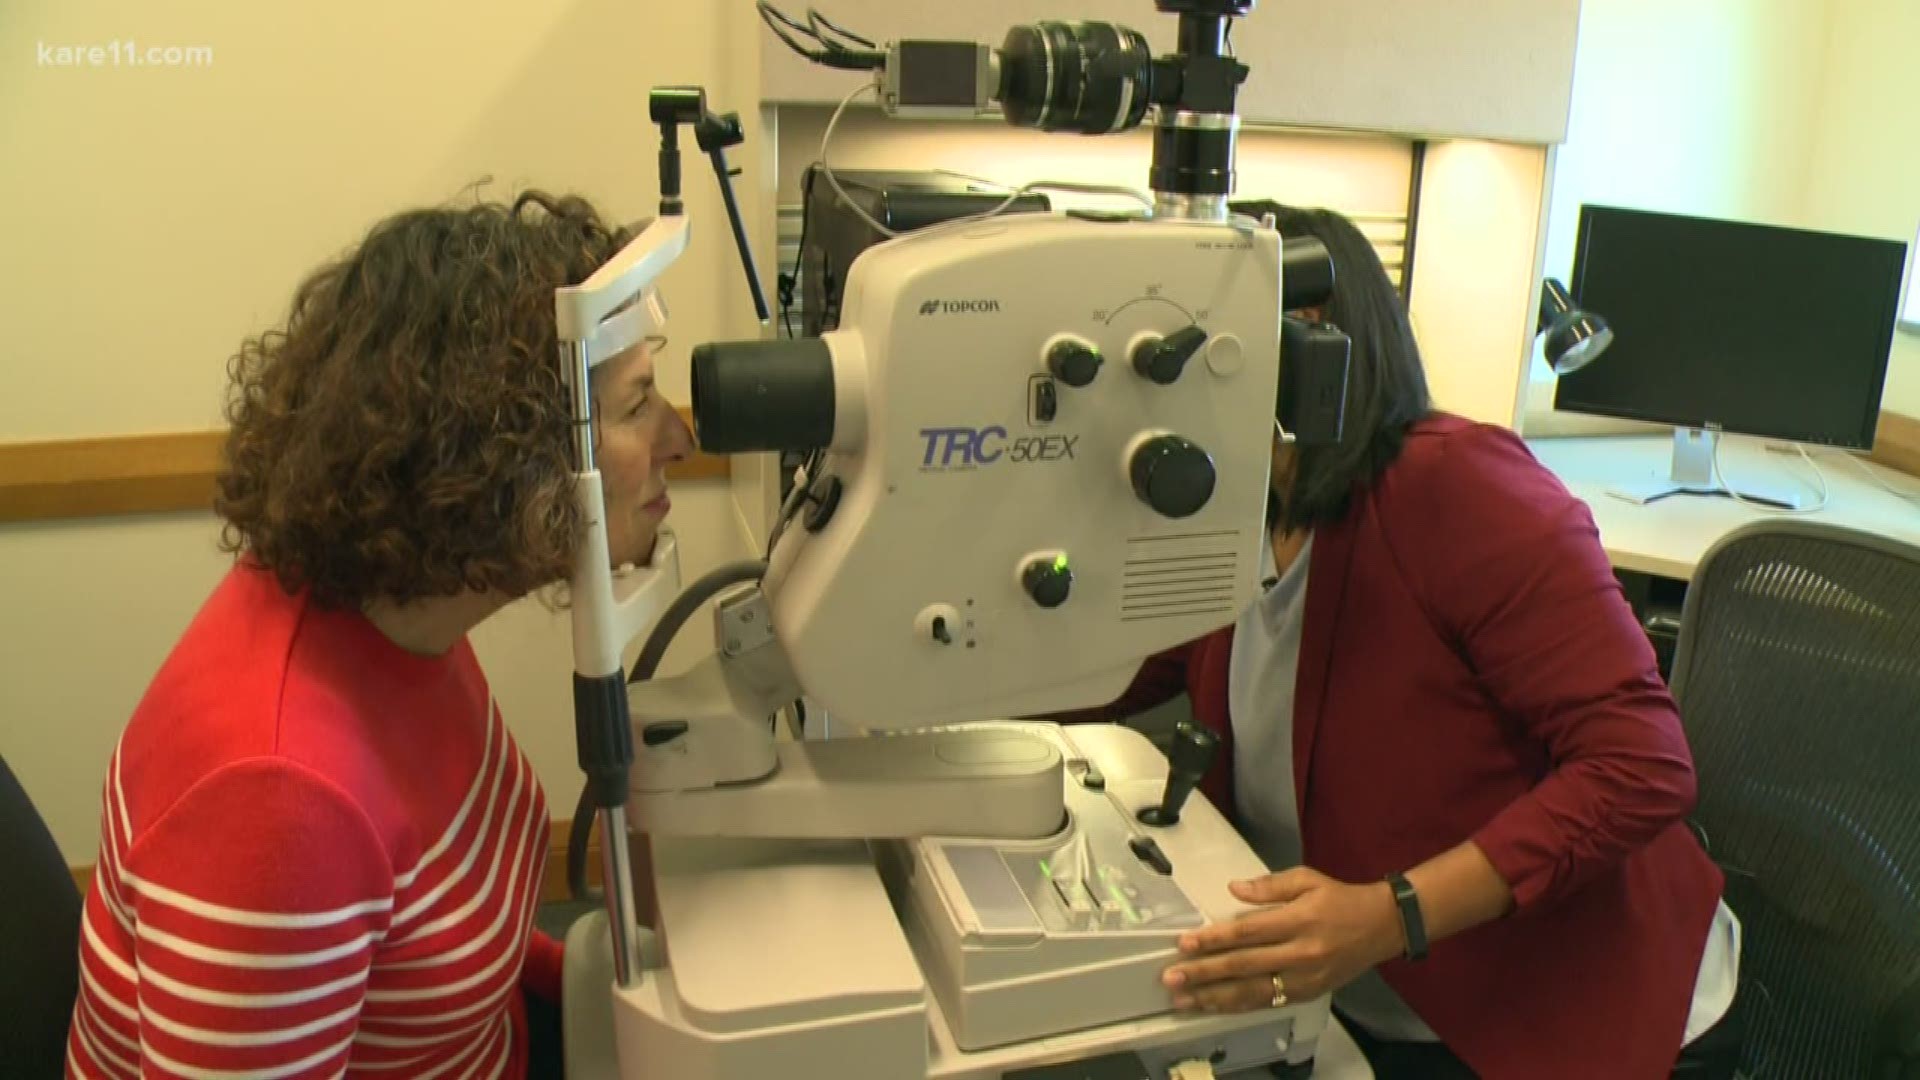 In the not so distant future, your annual eye exam could detect Alzheimer's in its early stages.